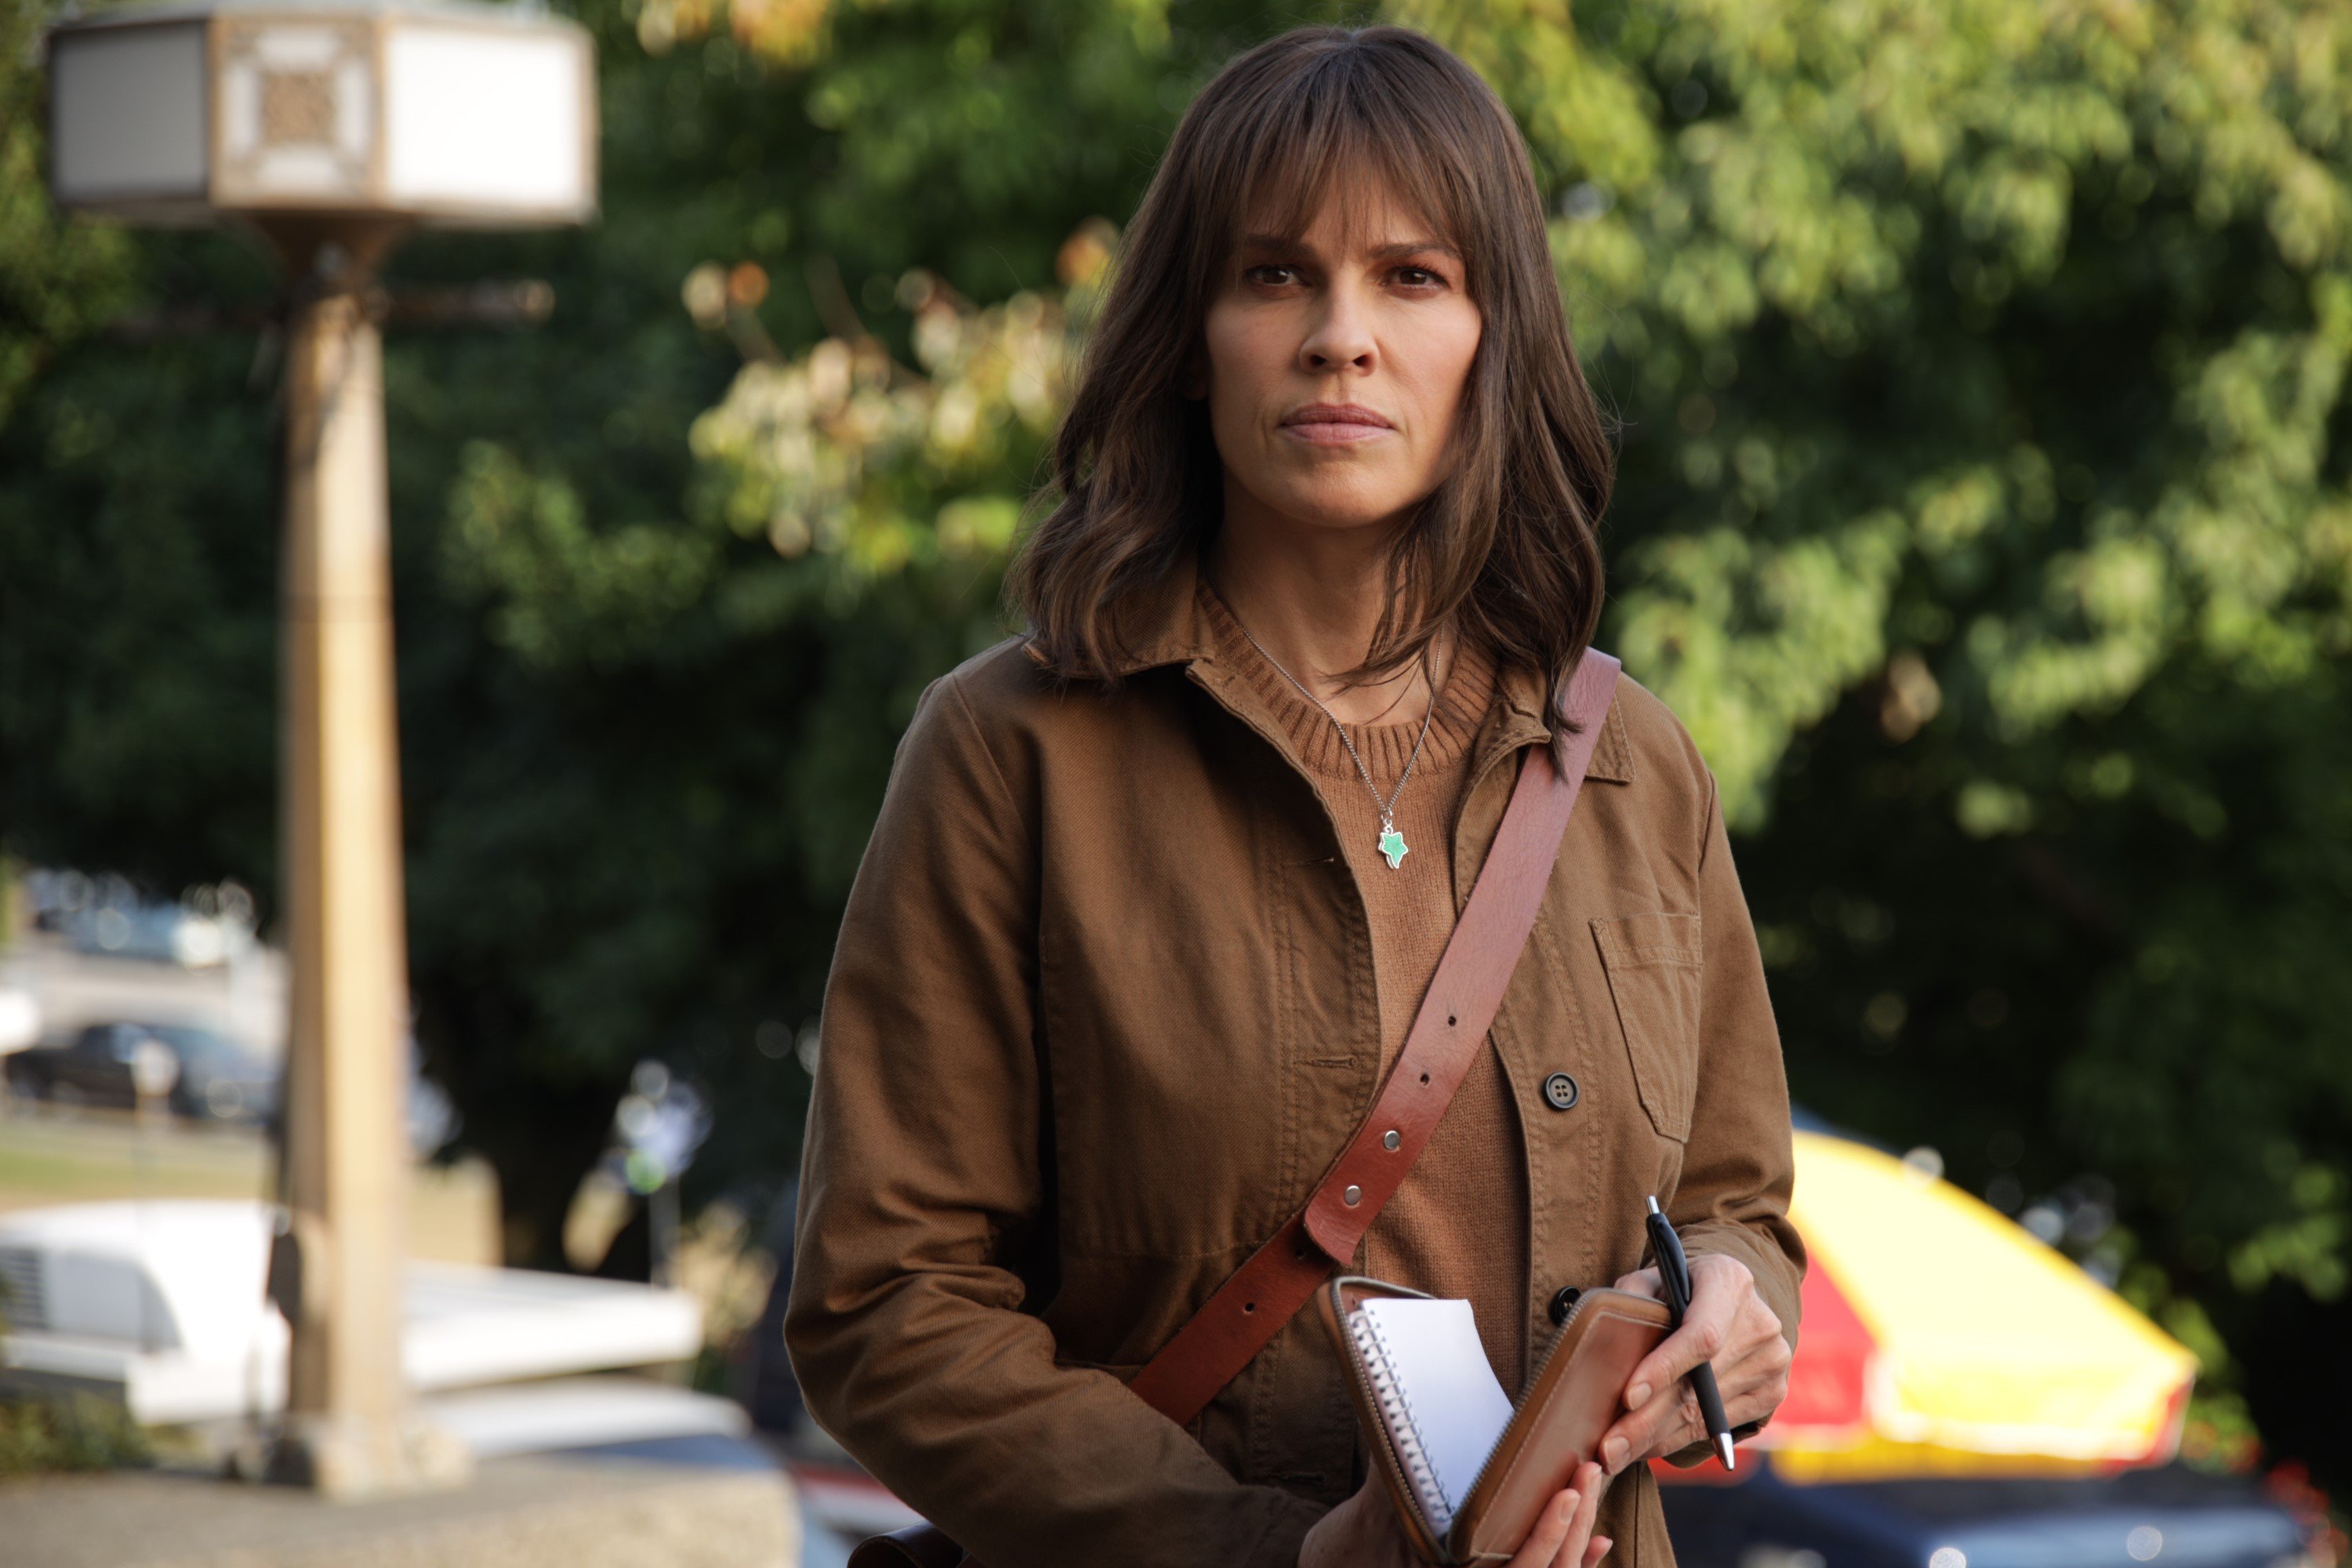 Hilary Swank, in character as Eileen Fitzgerald in 'Alaska Daily' Episode 6 on ABC, wears a brown jacket over a brown sweater and holds a pen and notepad.